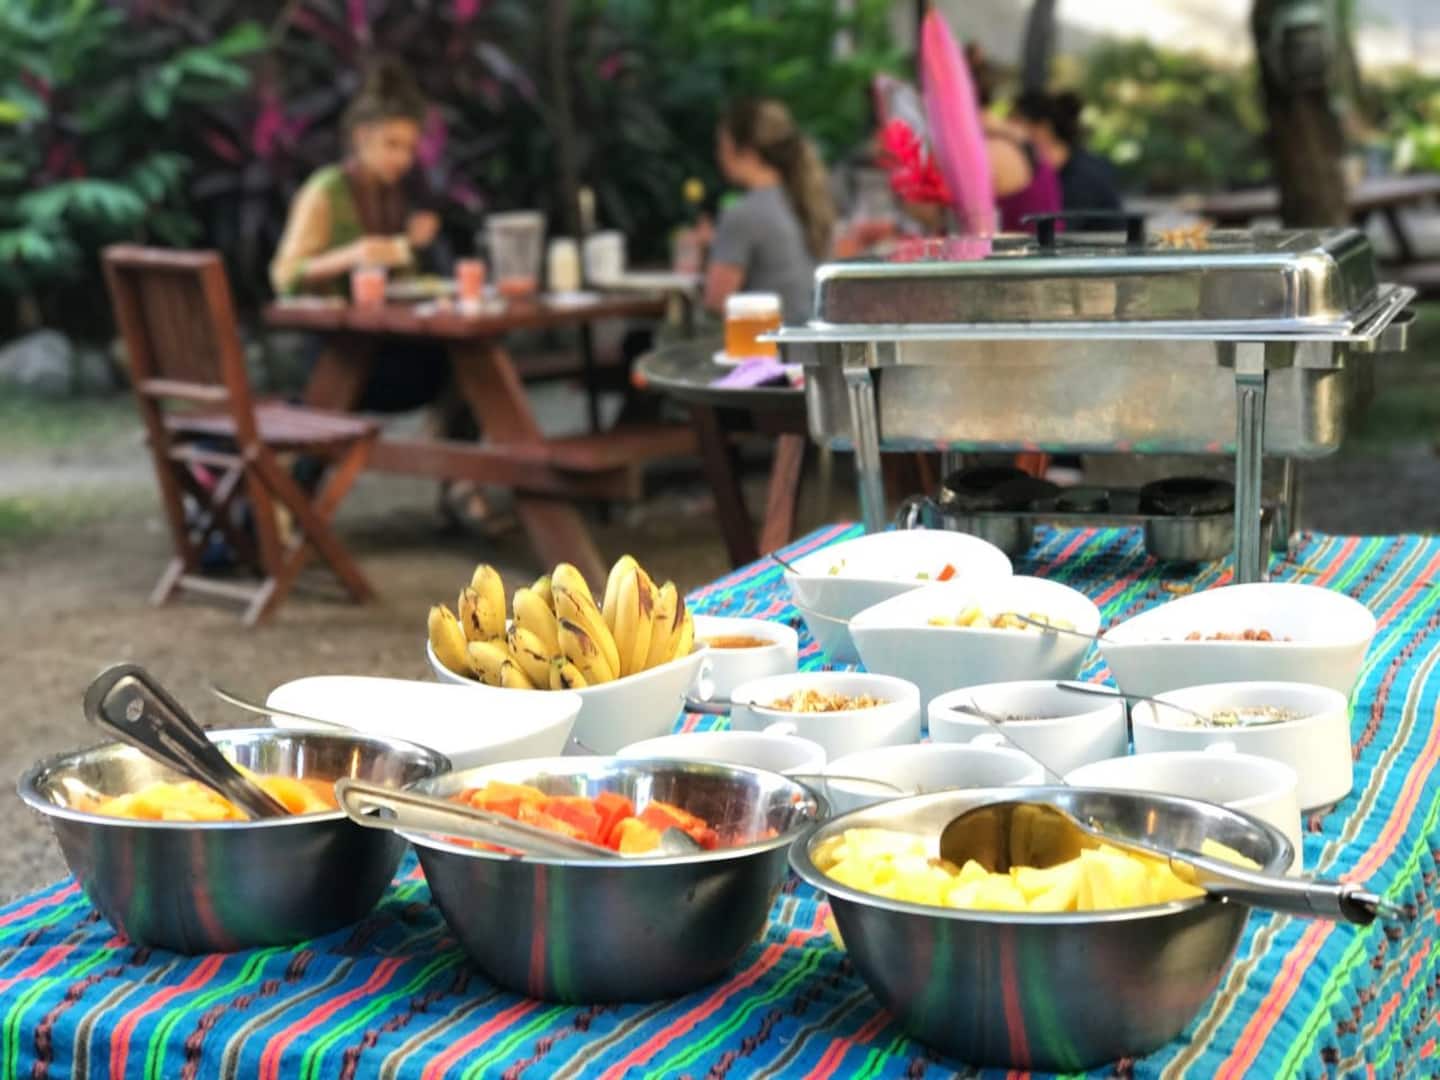 private chef grilling outdoors tequila tasting tour | things to do in sayulita mexico